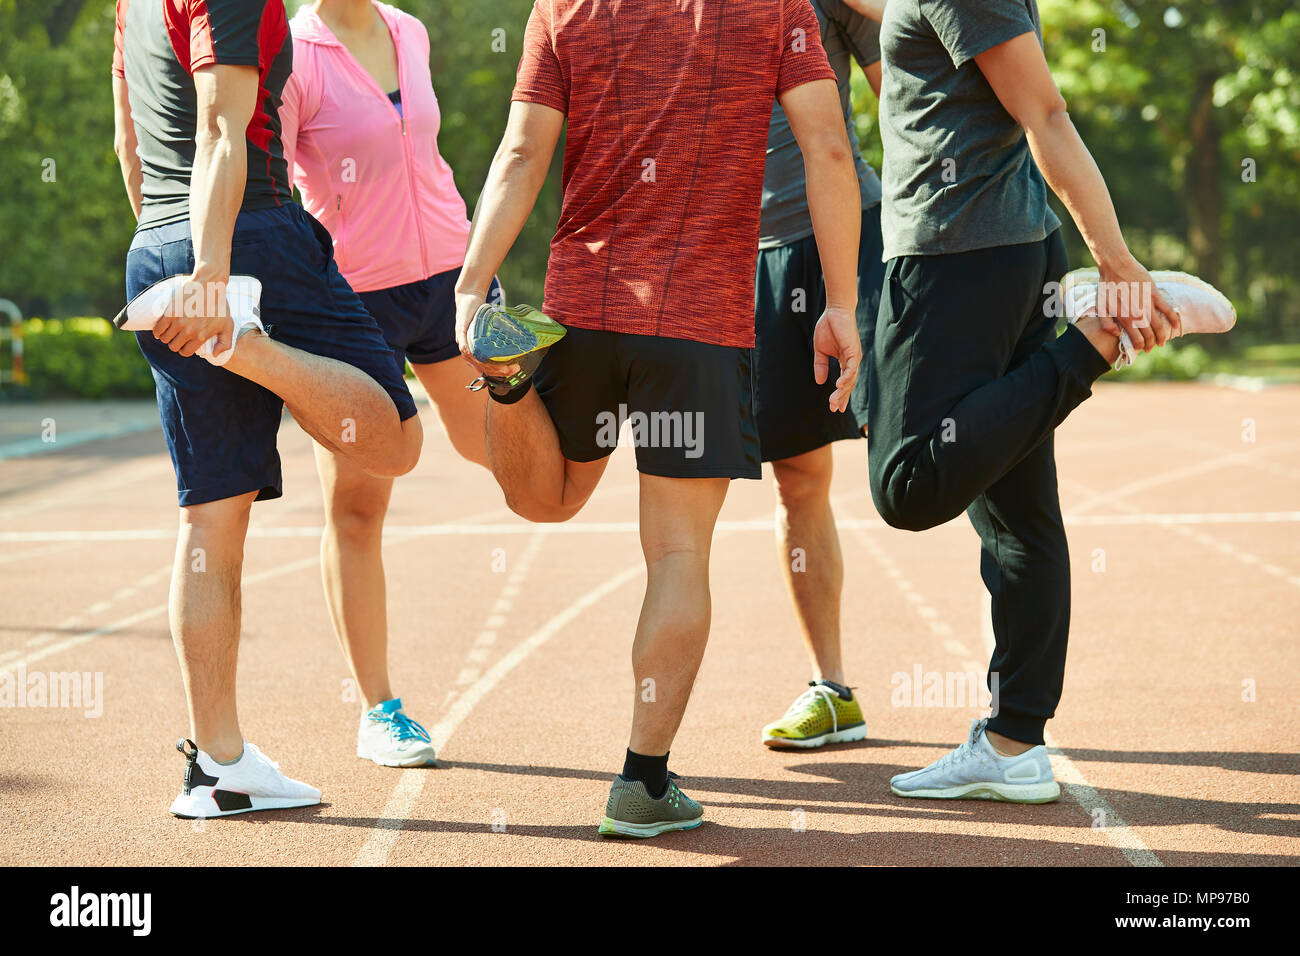 group of young asian adults warming up stretching legs on track. Stock Photo